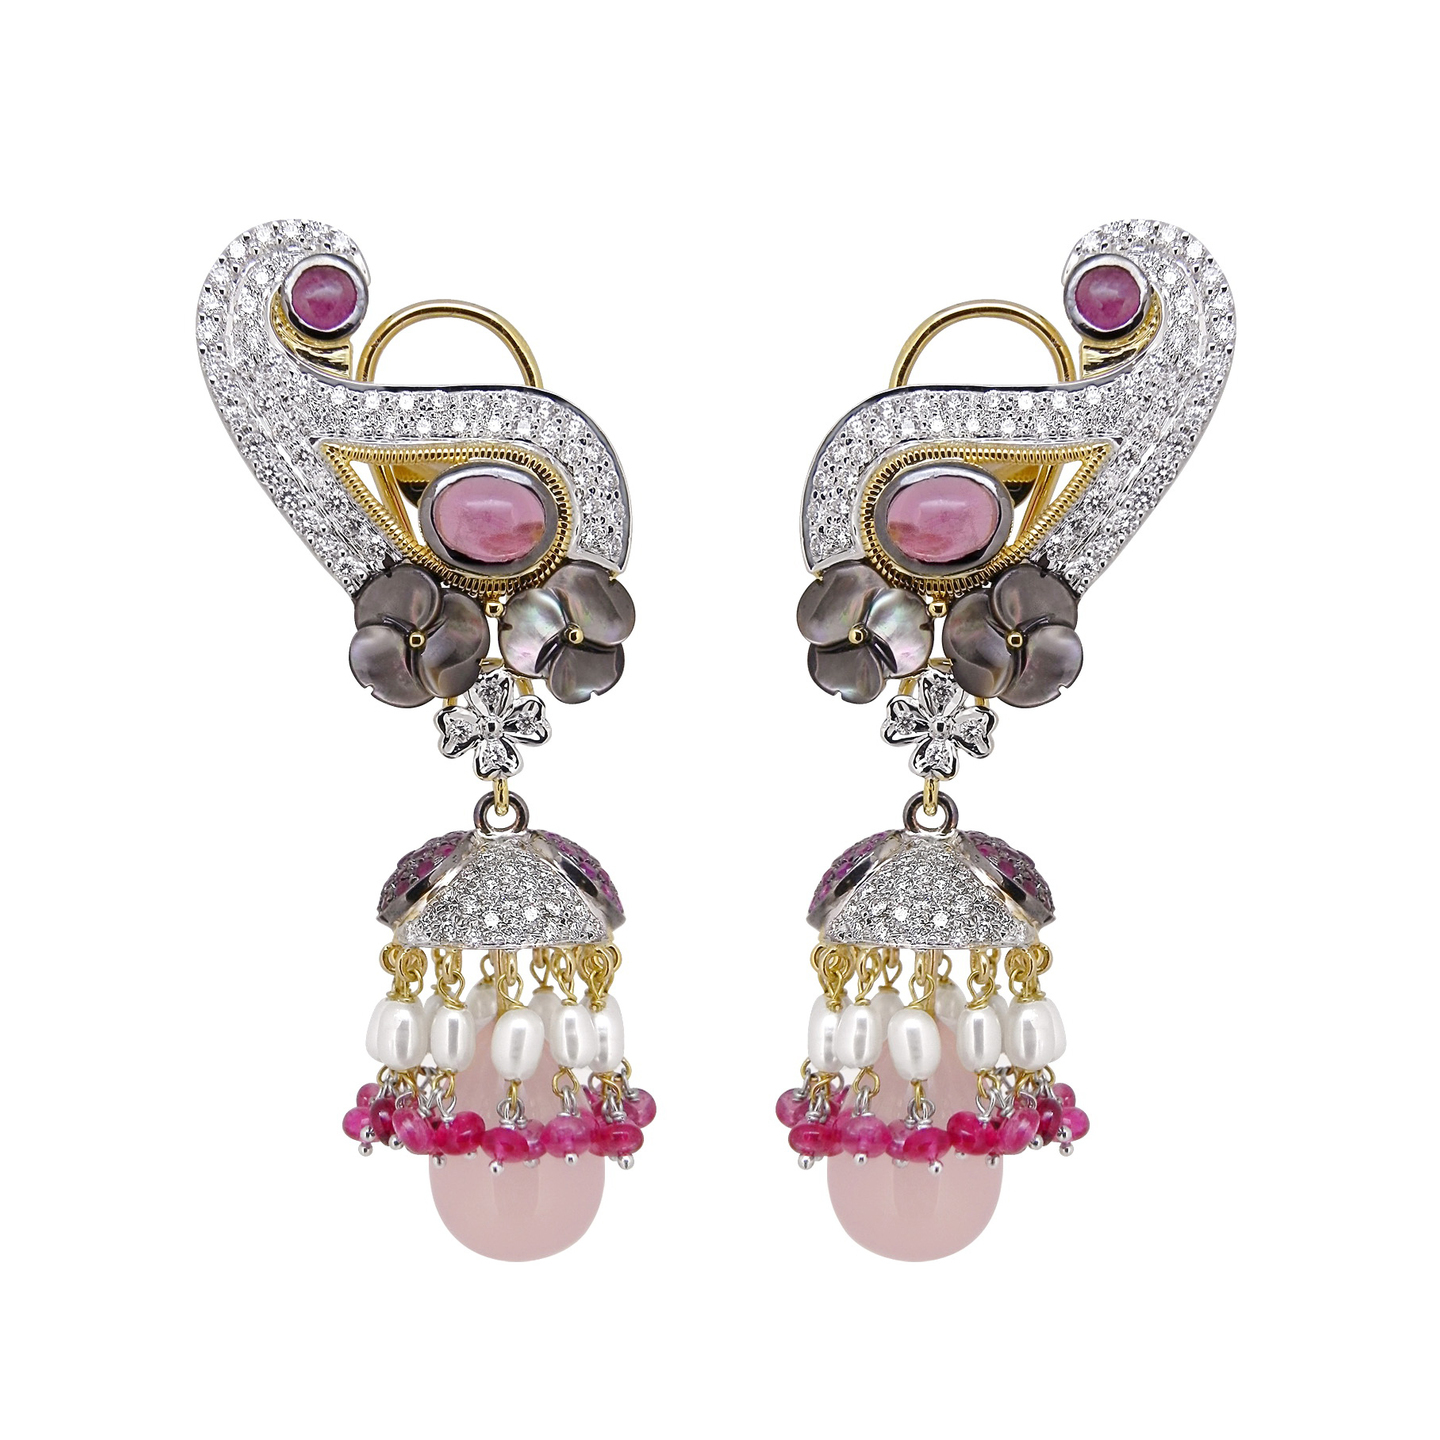 Majestic Chandelier earrings in diamonds and vivid gemstones , befitting a special occasion